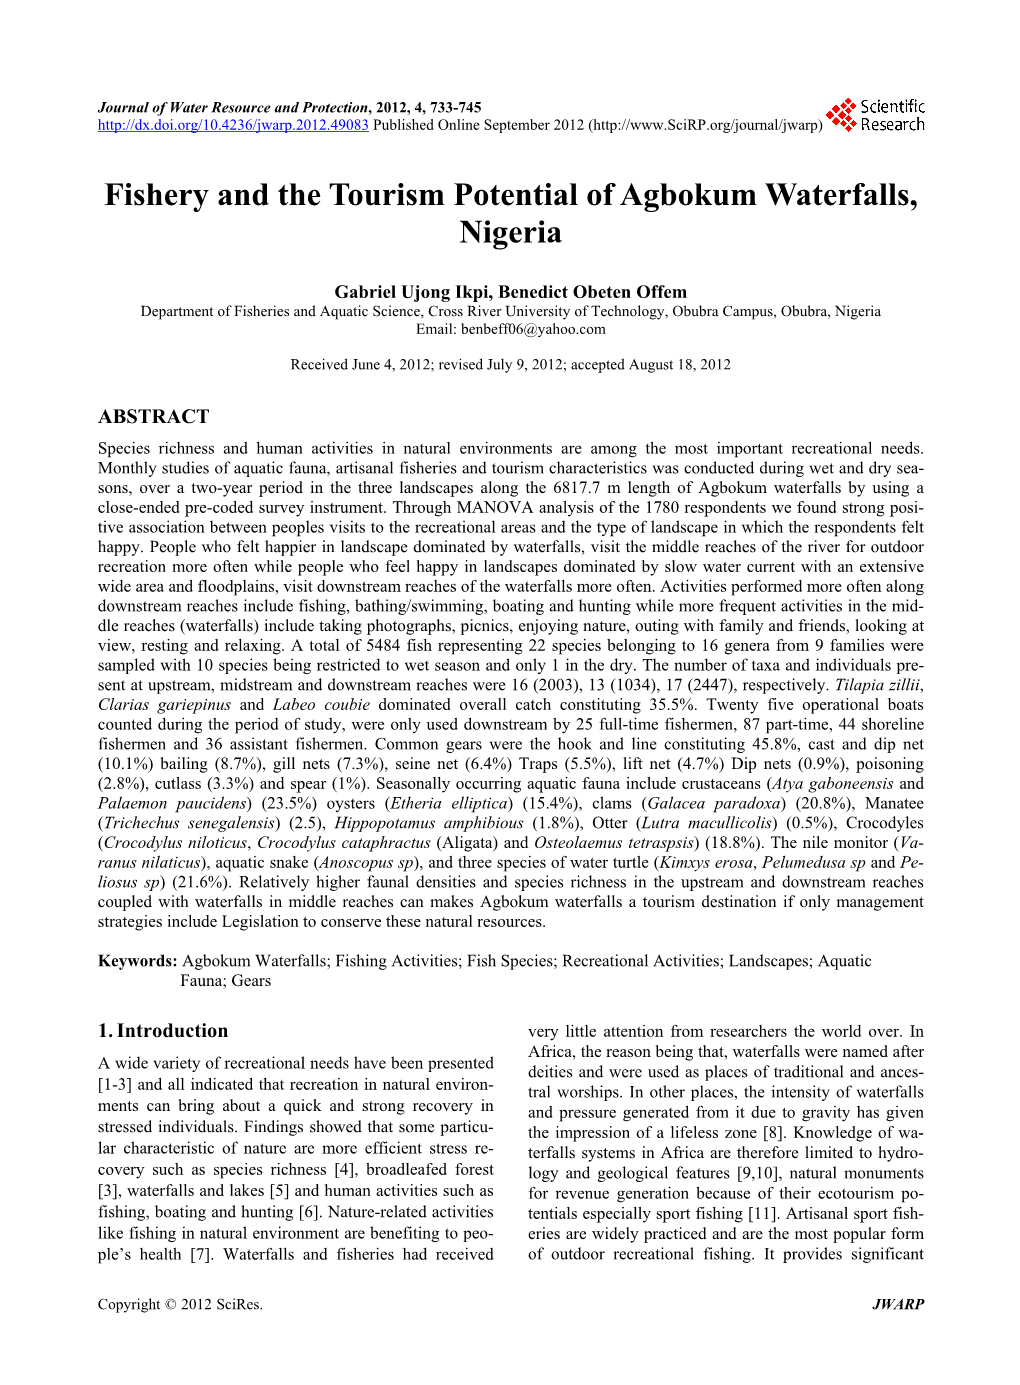 Fishery and the Tourism Potential of Agbokum Waterfalls, Nigeria